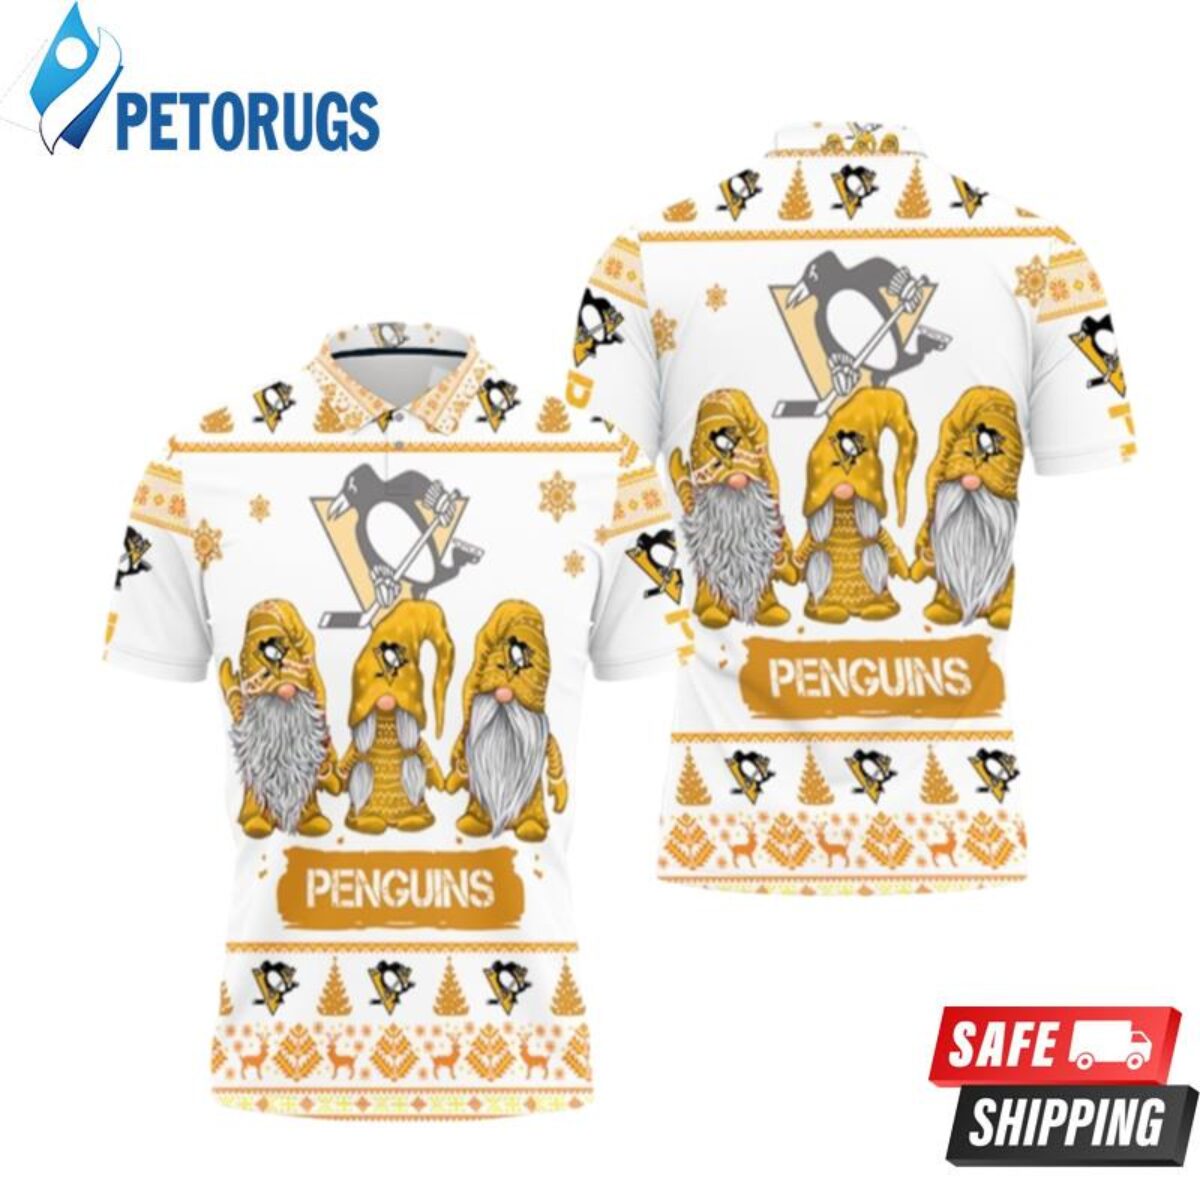 Pittsburgh Penguins Snoopy Lover Printed Polo Shirts - Peto Rugs